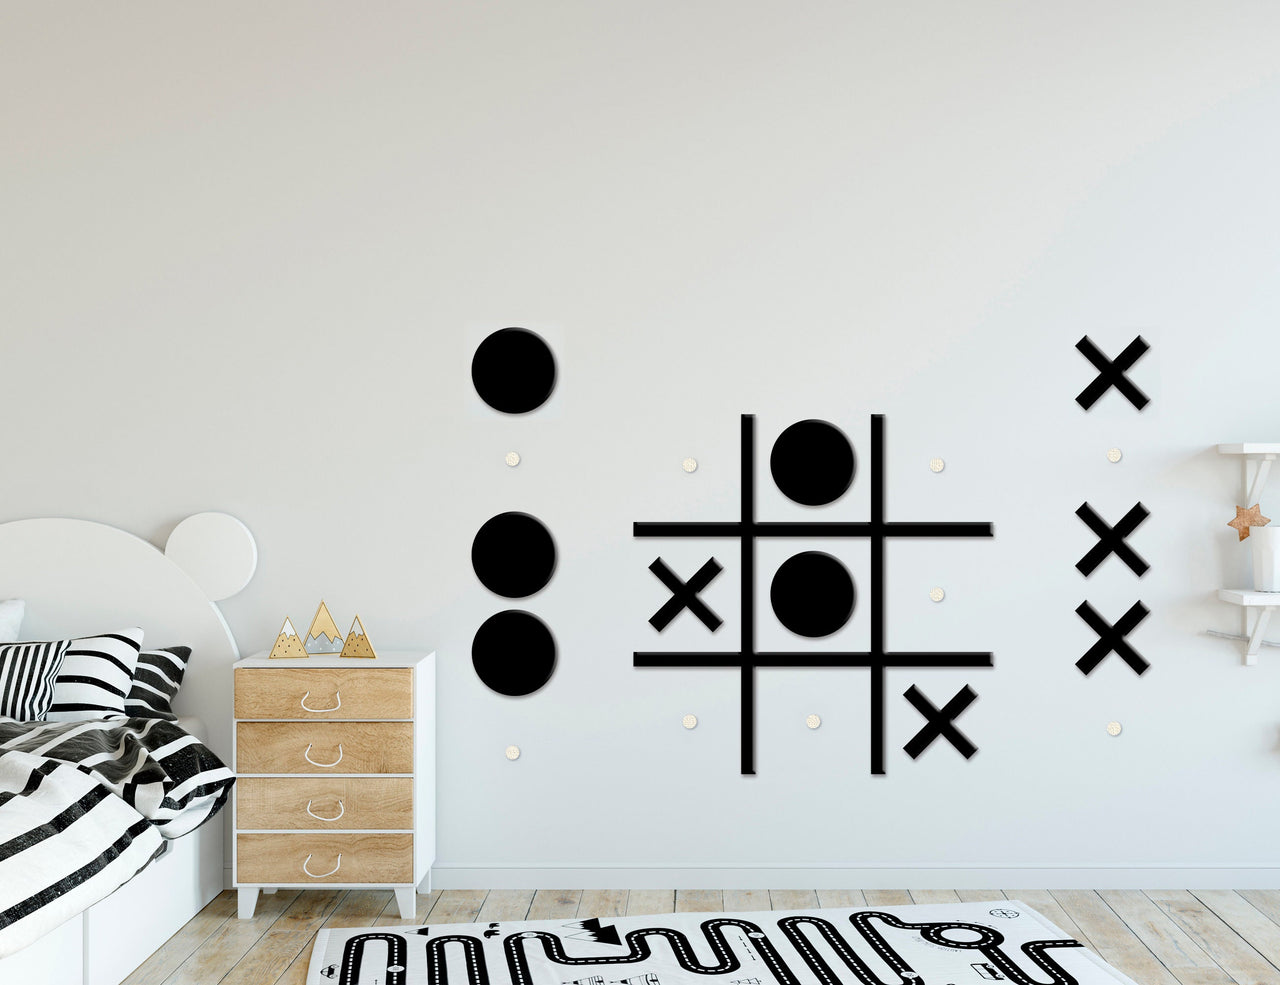 Tic-Tac-Toe Game Wall Art - Tic Tac Toe Playroom Kids Game - Games for Family Time - Noughts and Crosses Game - Board Game Baby Friendly